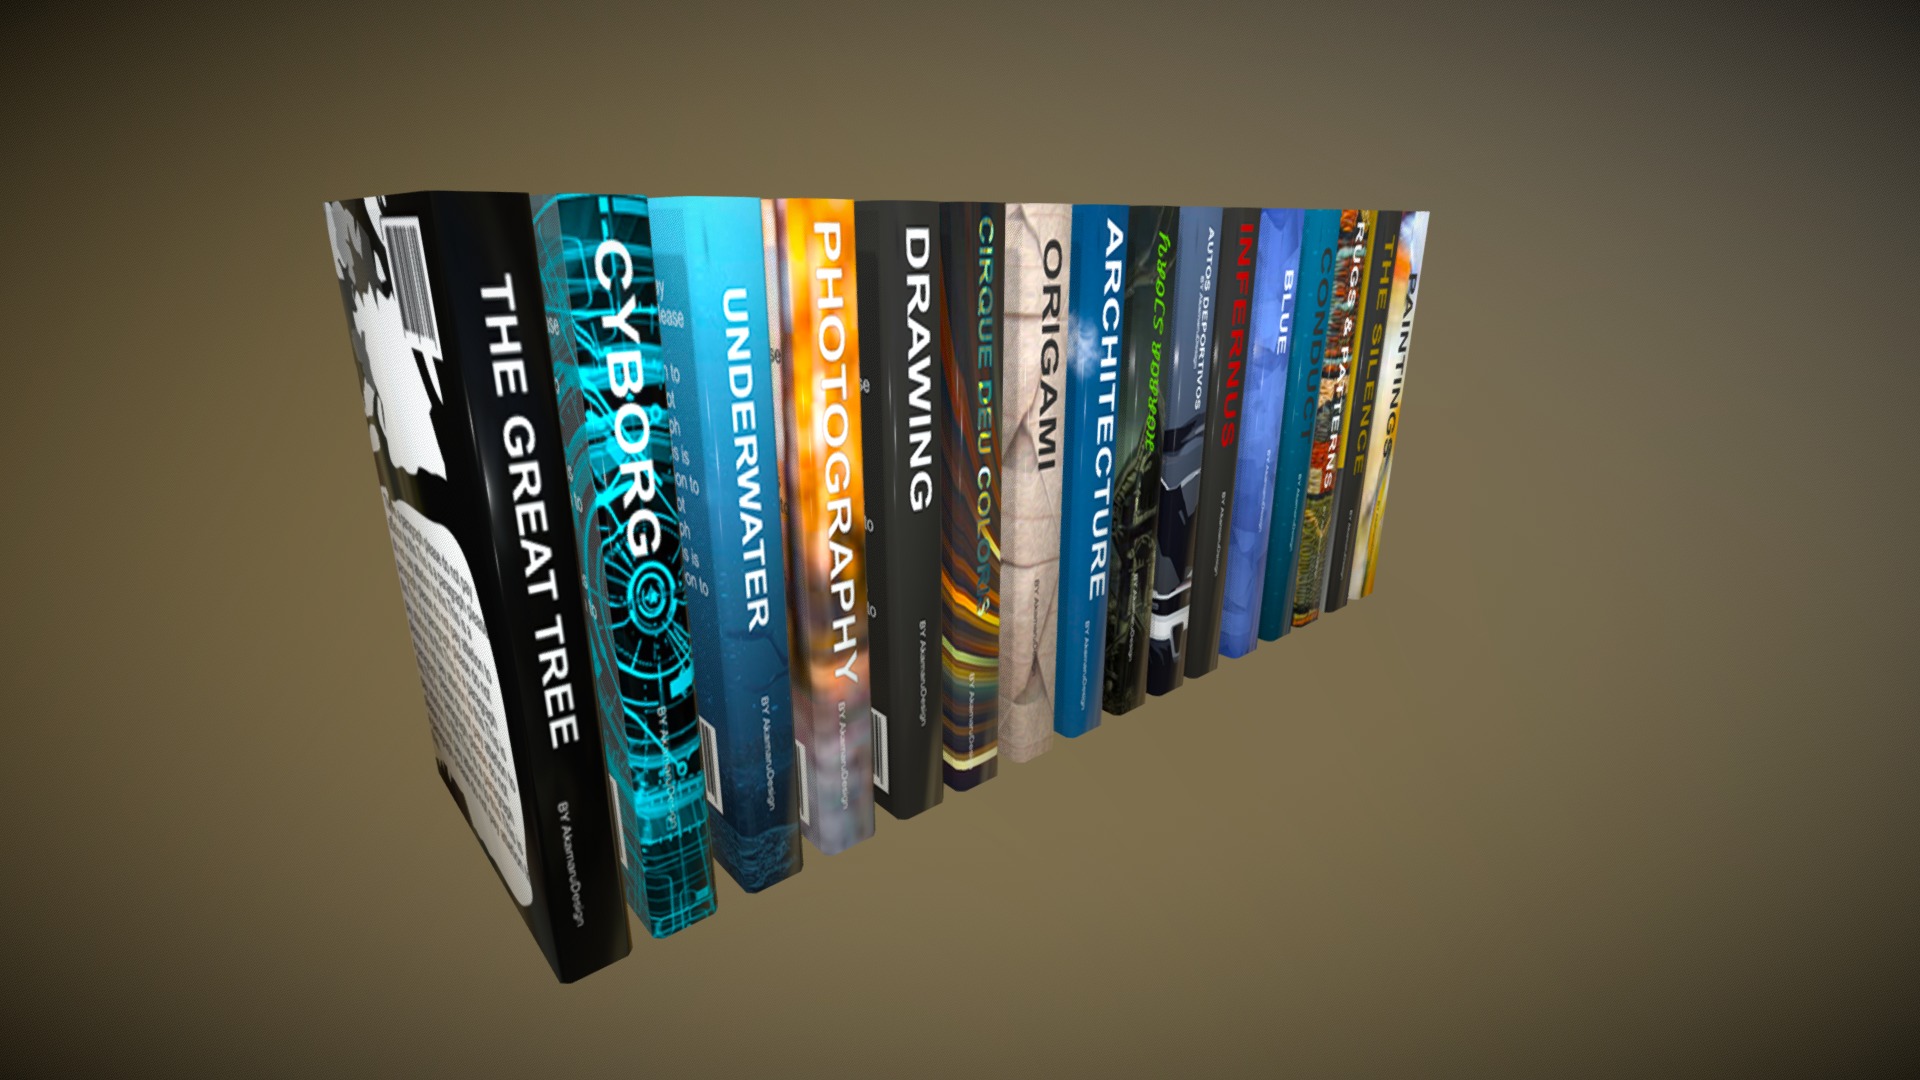 3D model Furniture books - This is a 3D model of the Furniture books. The 3D model is about a group of books.